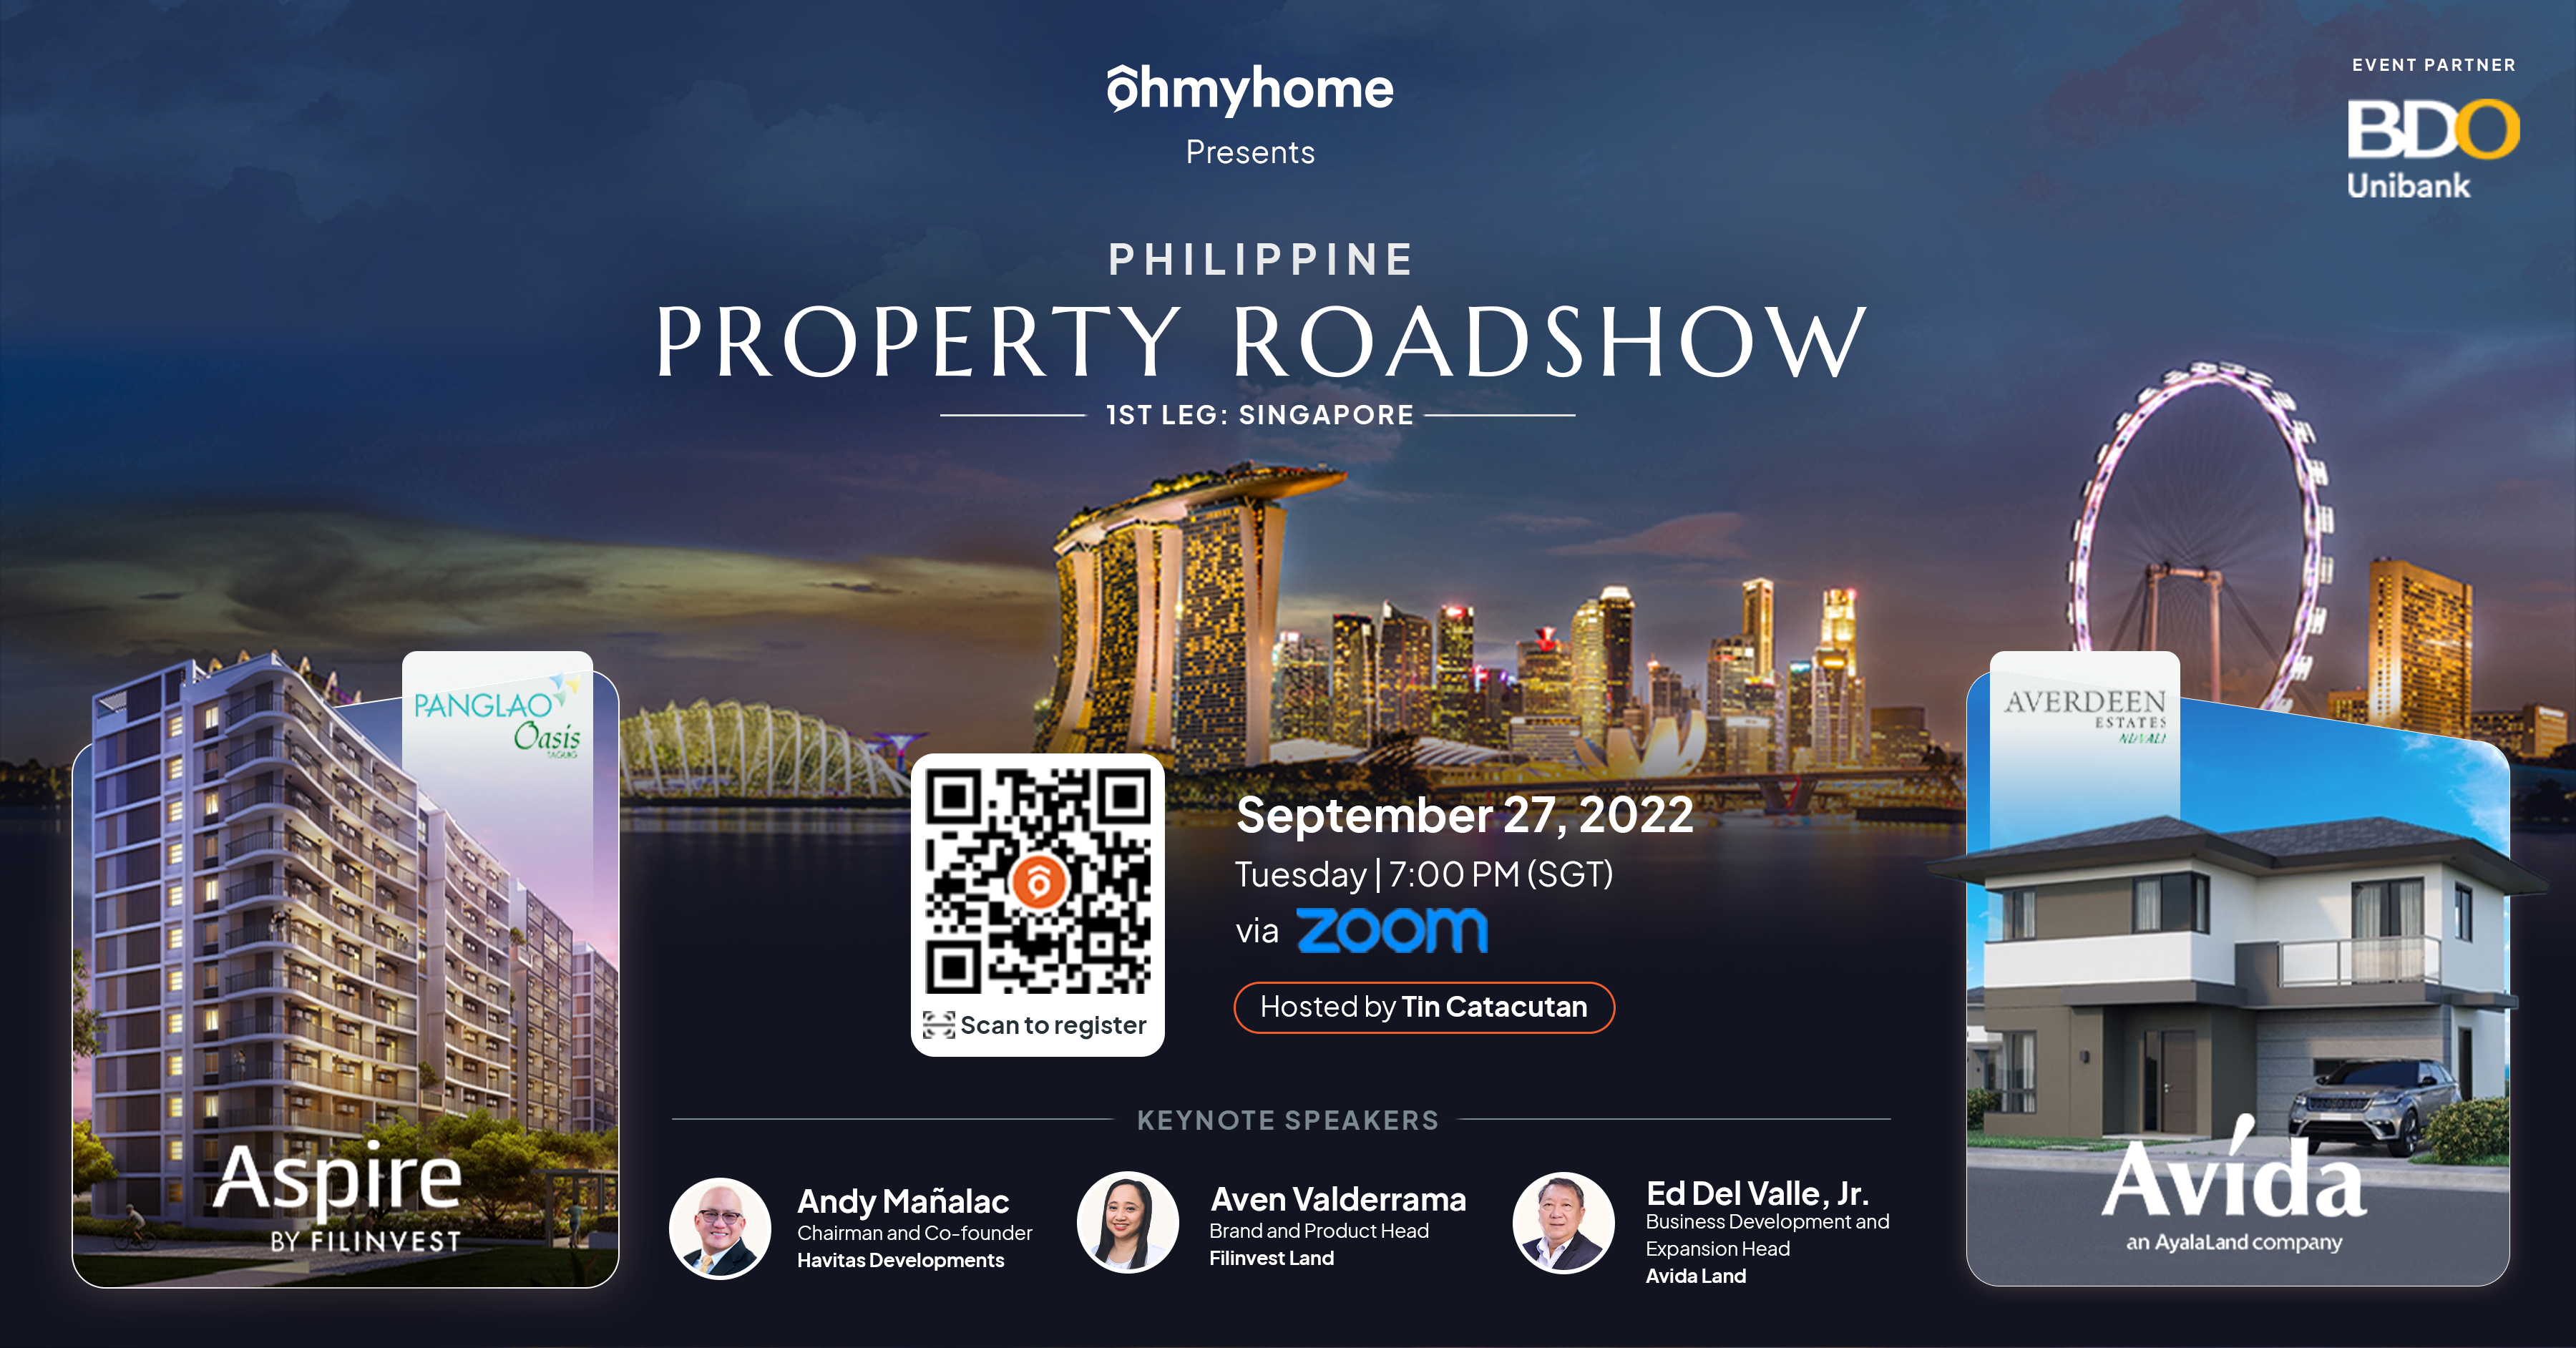 Singapore OFWs Are in for a Treat as the Ohmyhome Philippine Property Roadshow Kicks off This September 27!